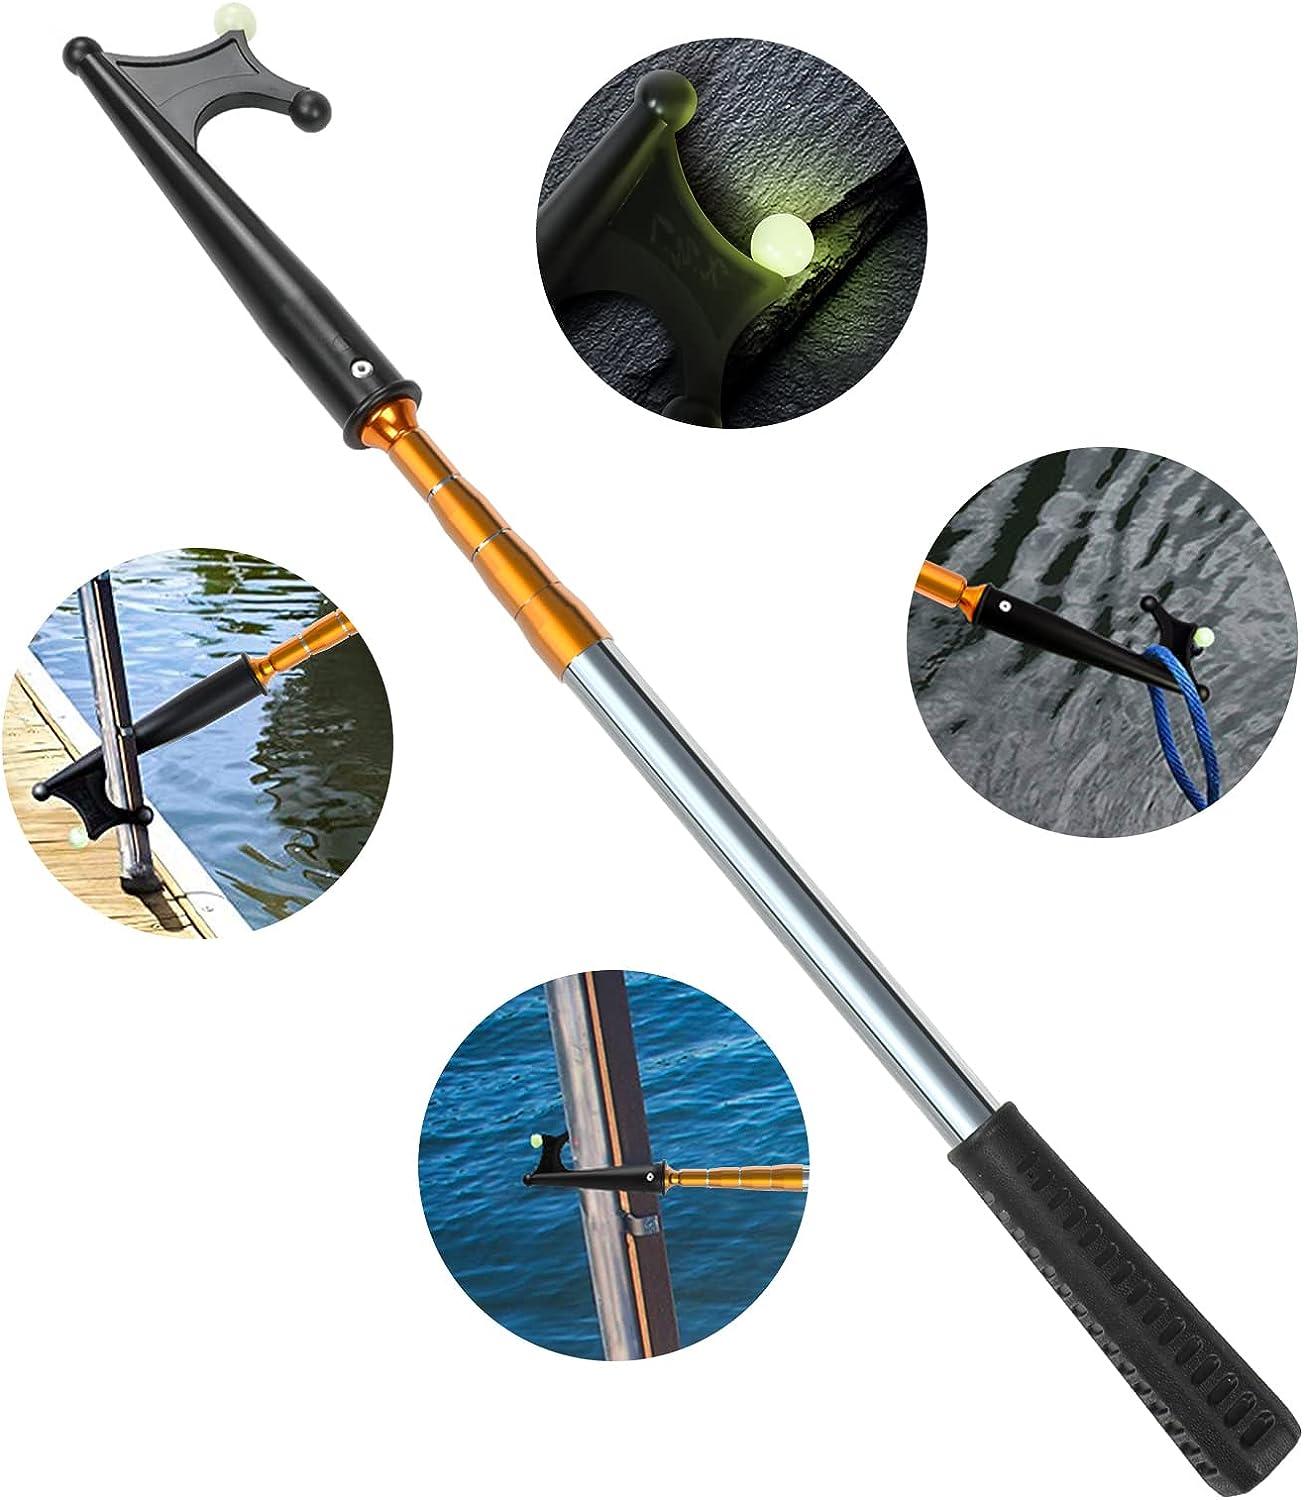 Stainless Steel Telescopic Pole with hook